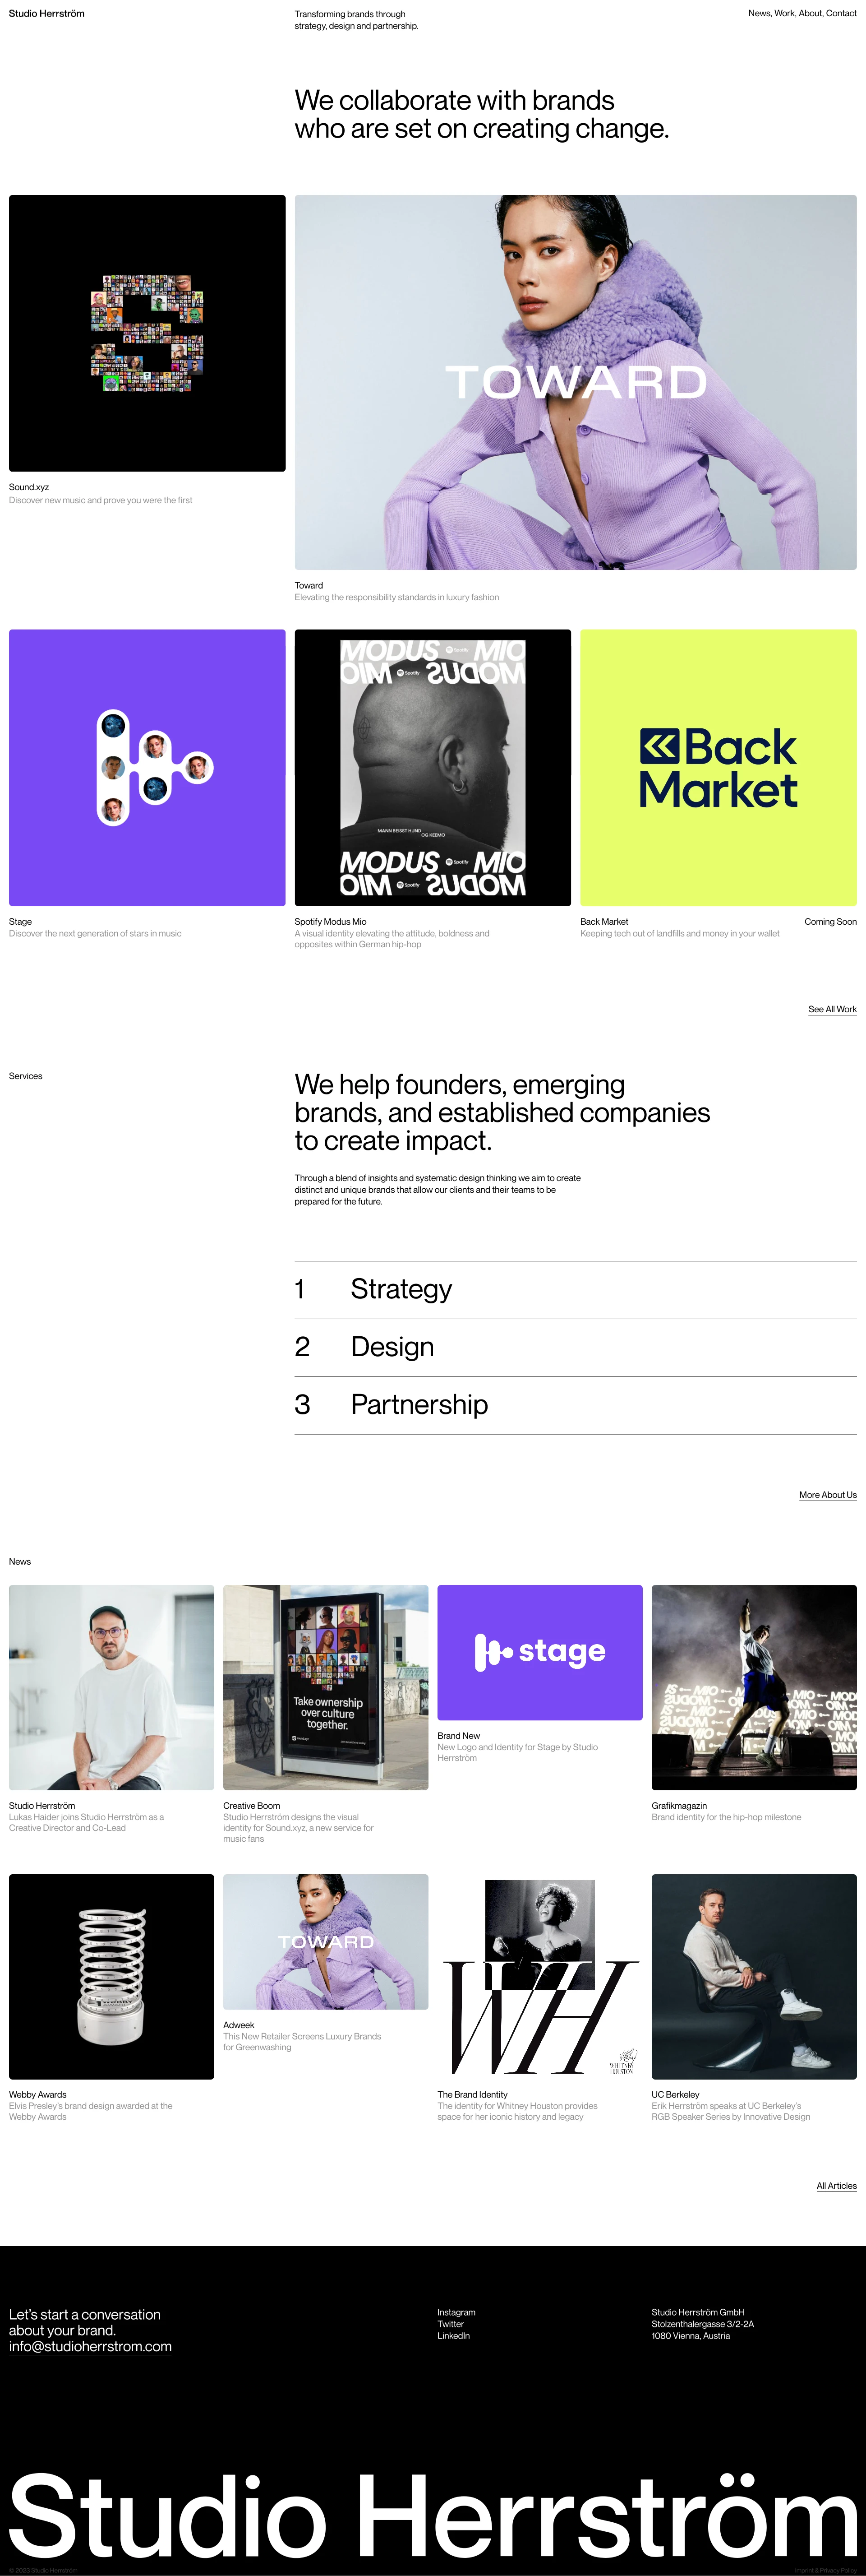 Studio Herrström Landing Page Example: A design studio transforming brands through brand identity, campaigns, and activations. We help founders, emerging brands, and companies to create impact.